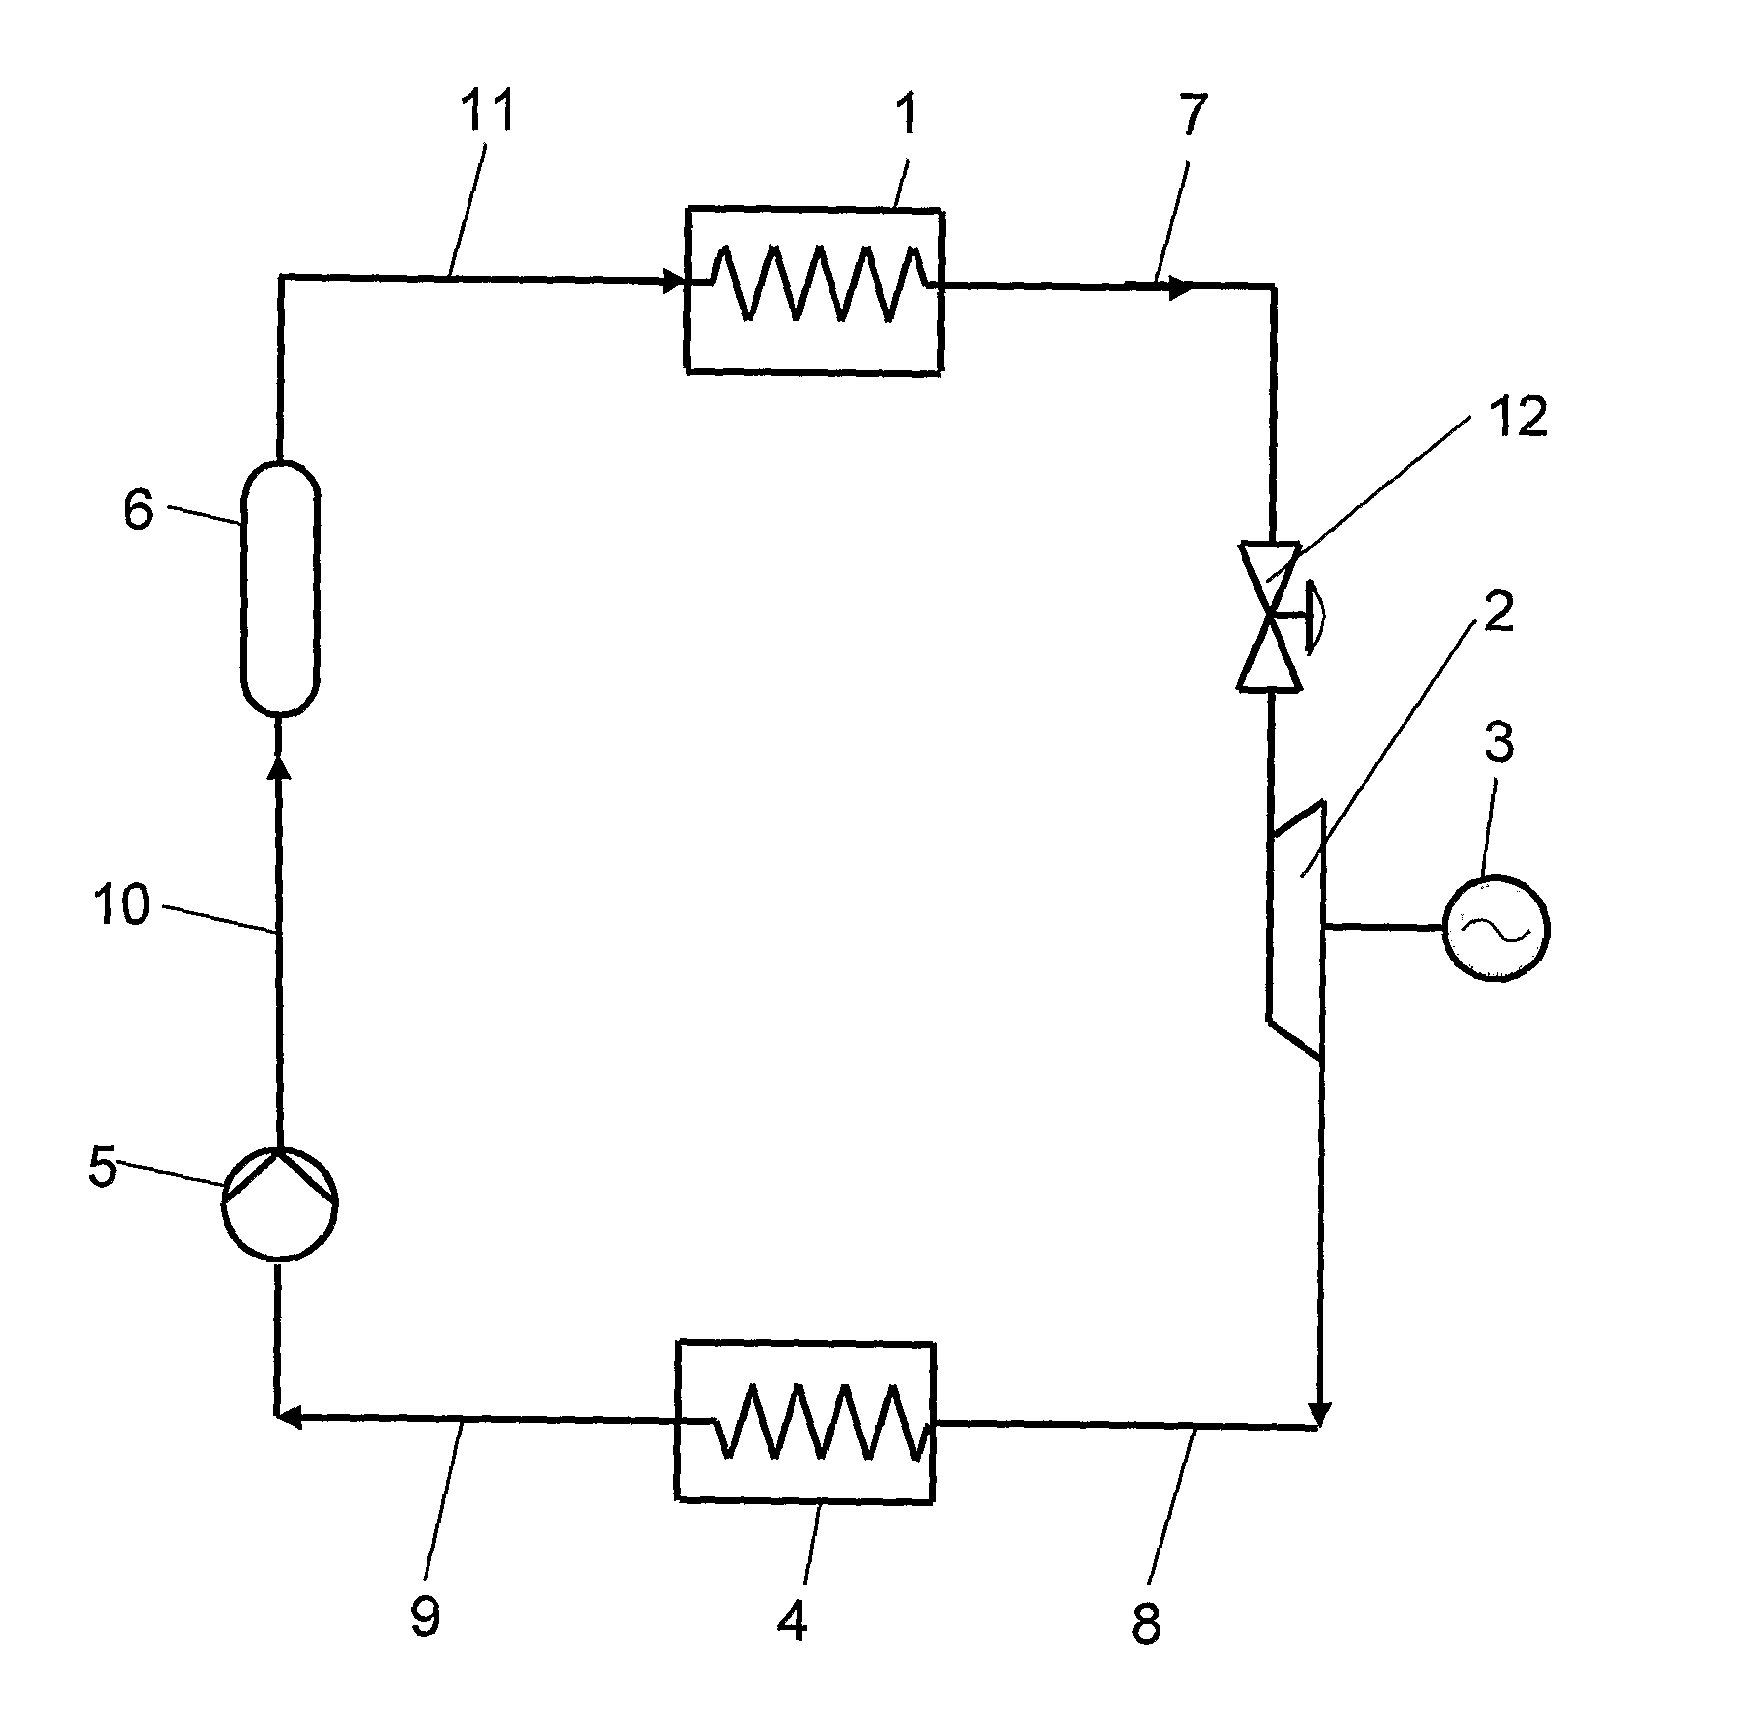 Process and device for using of low temperature heat for the production of electrical energy